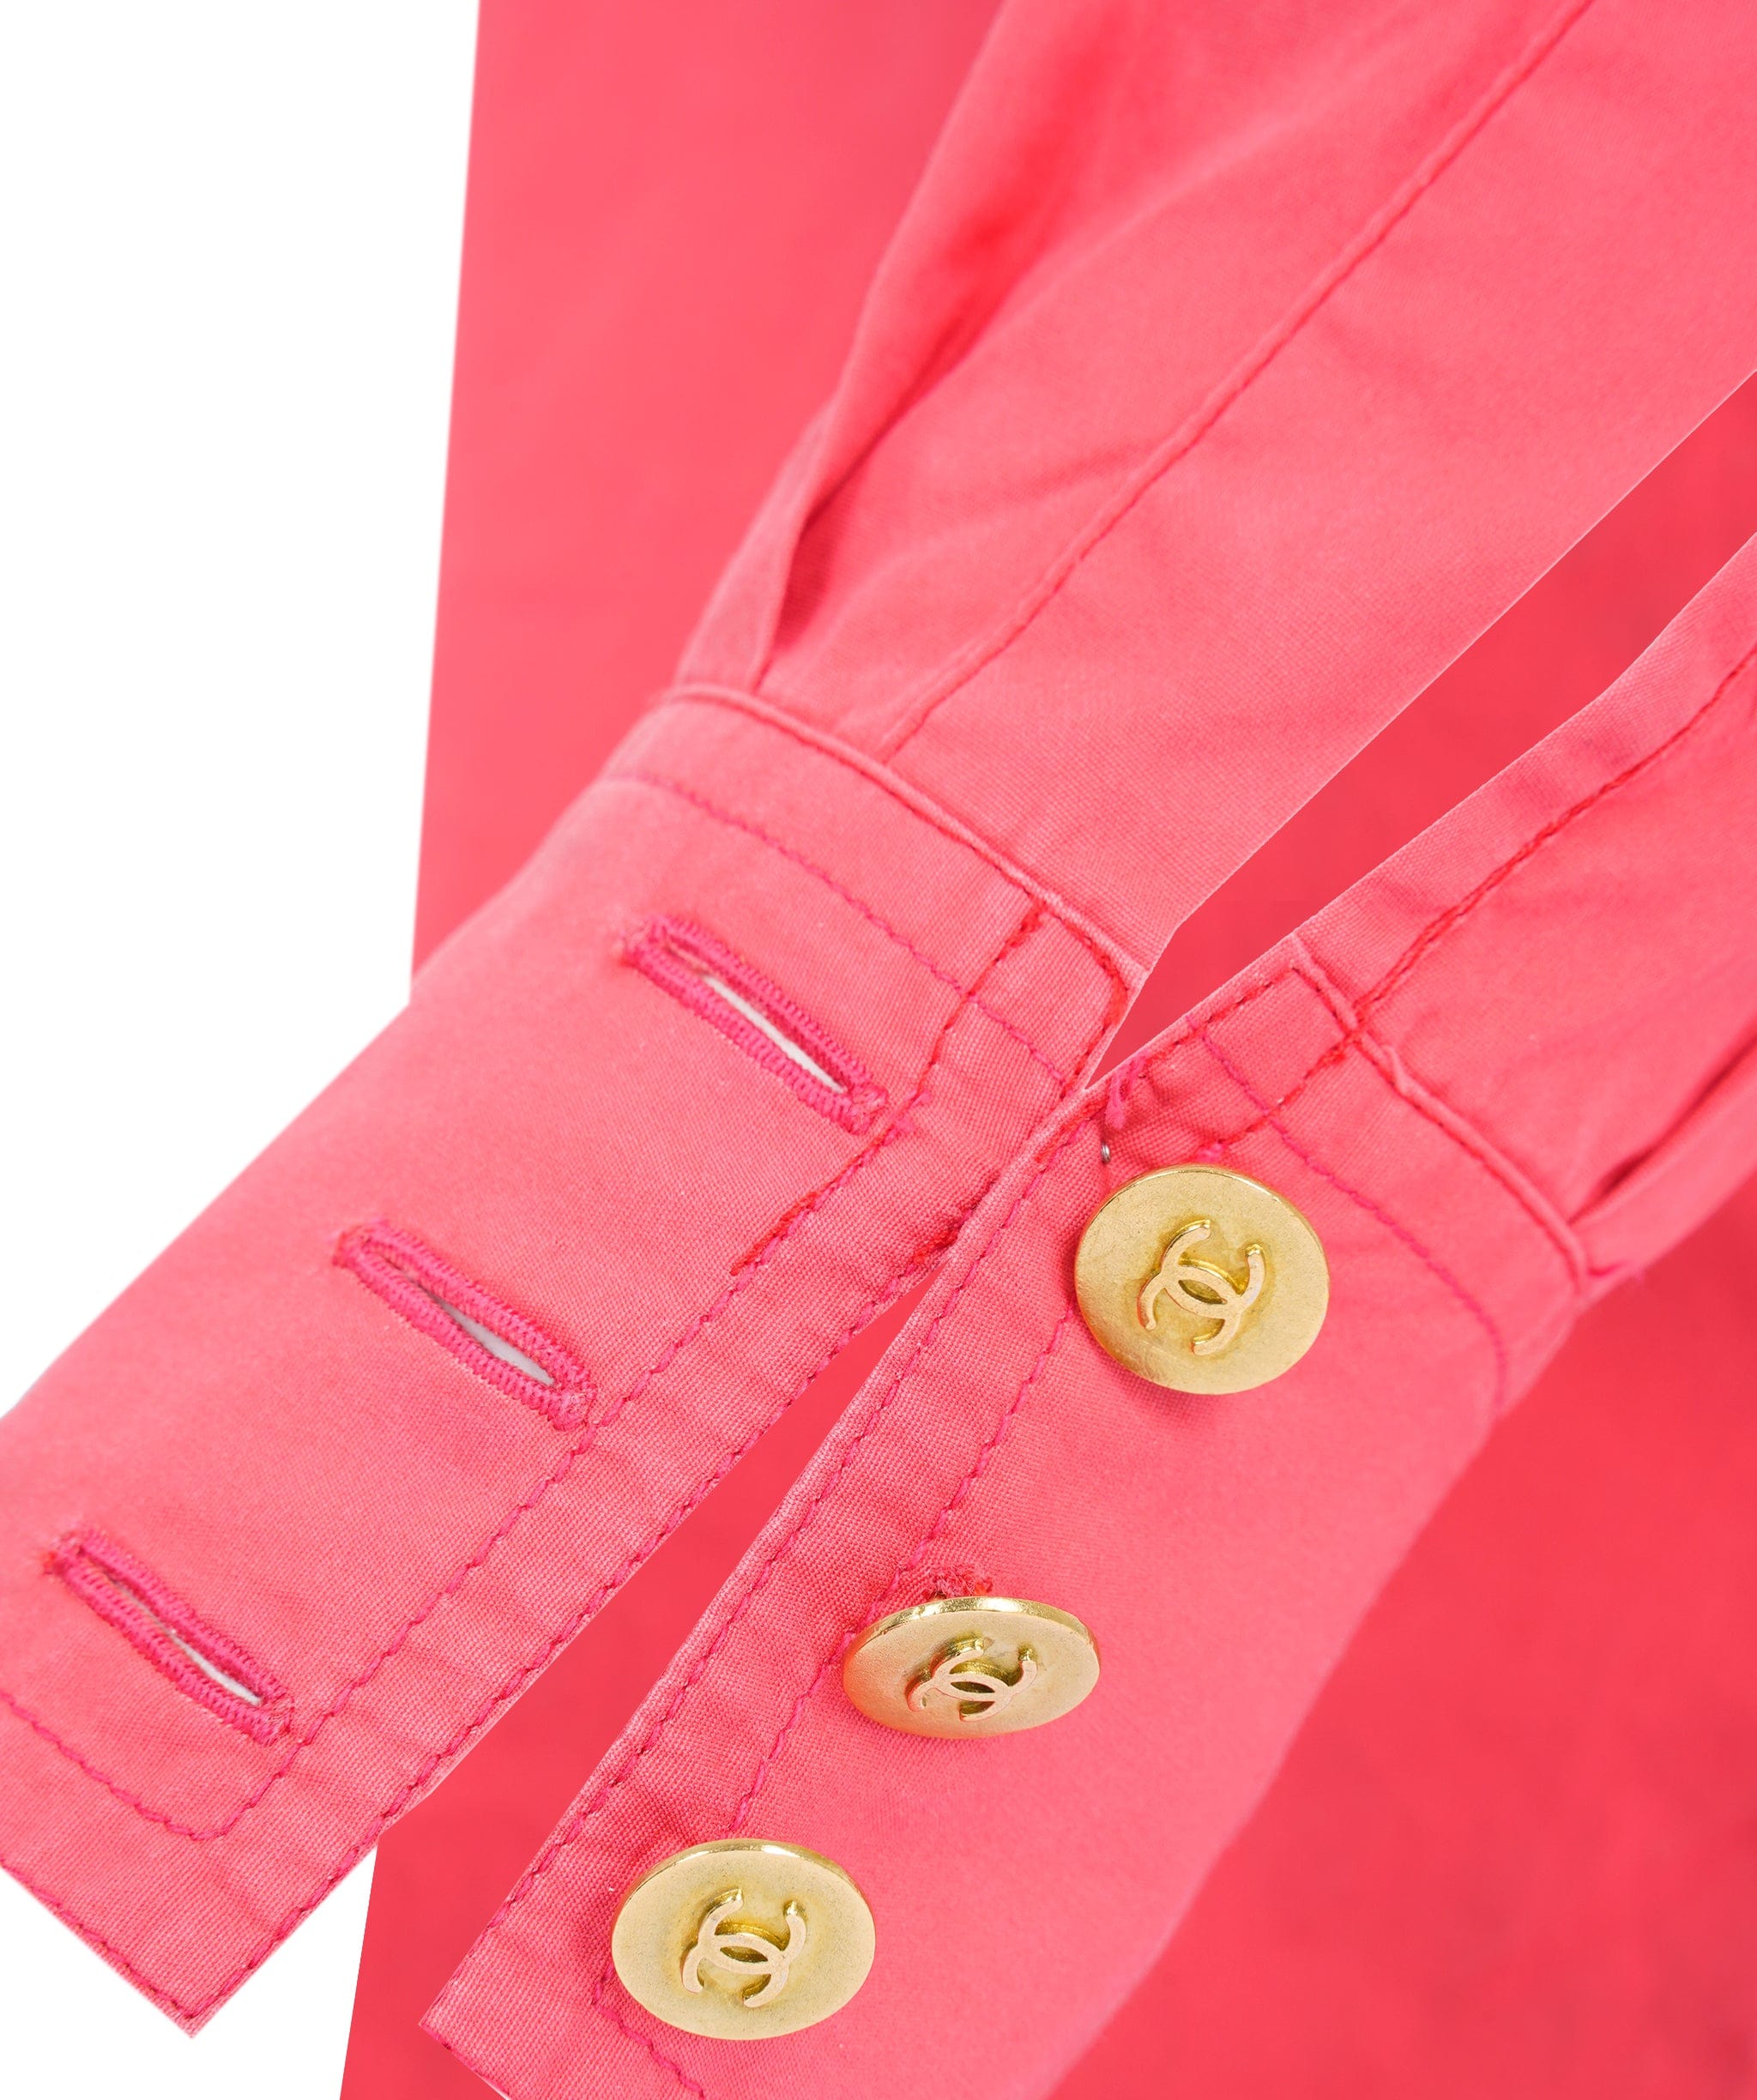 Chanel Chanel Gold CC Buttons Shirt Orange Red ASL5165